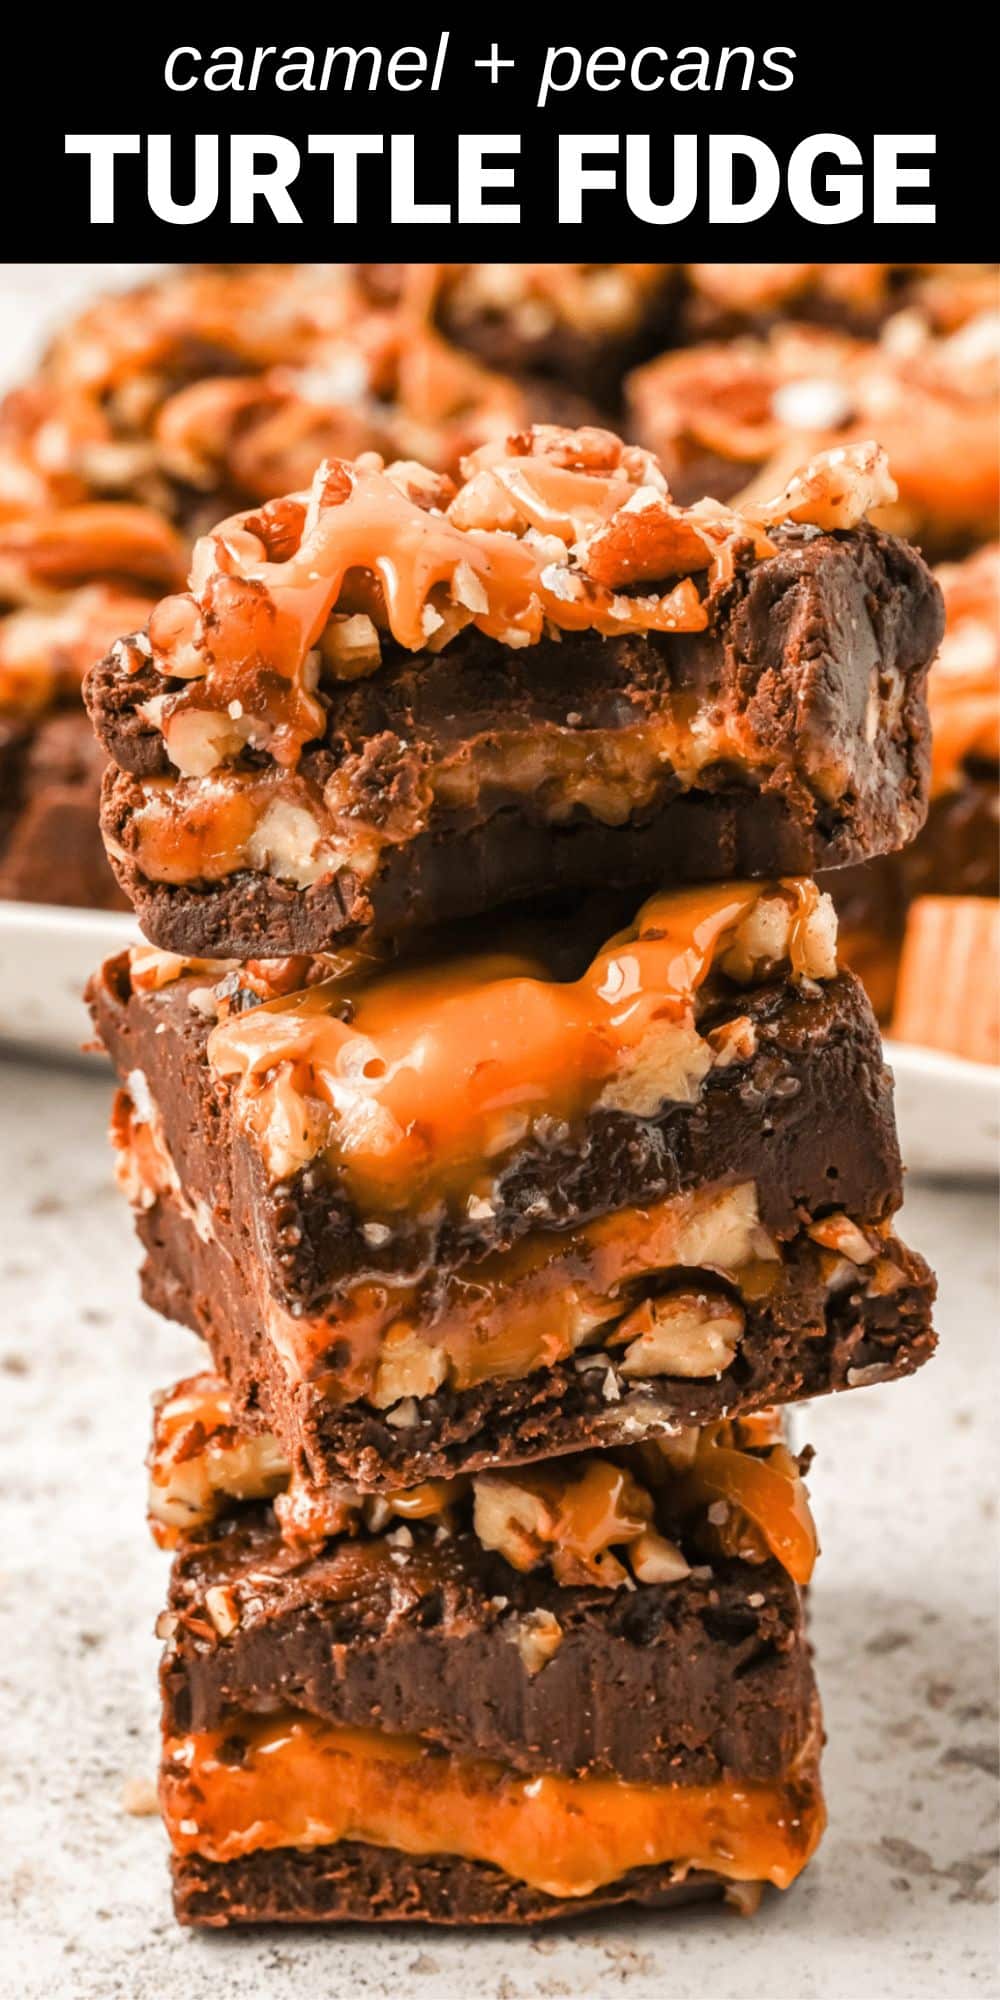 This turtle fudge is so rich and delicious that you won’t believe how easy it is to make. Layers of creamy chocolate fudge and crunchy pecans surround a gooey caramel layer, giving these delicious treats the taste of Turtles candies in fudge form. It’s simultaneously sweet, creamy, and nutty, with a little crunch from the pecans and a sprinkle of coarse salt on top to bring out the decadent chocolate and caramel flavors.